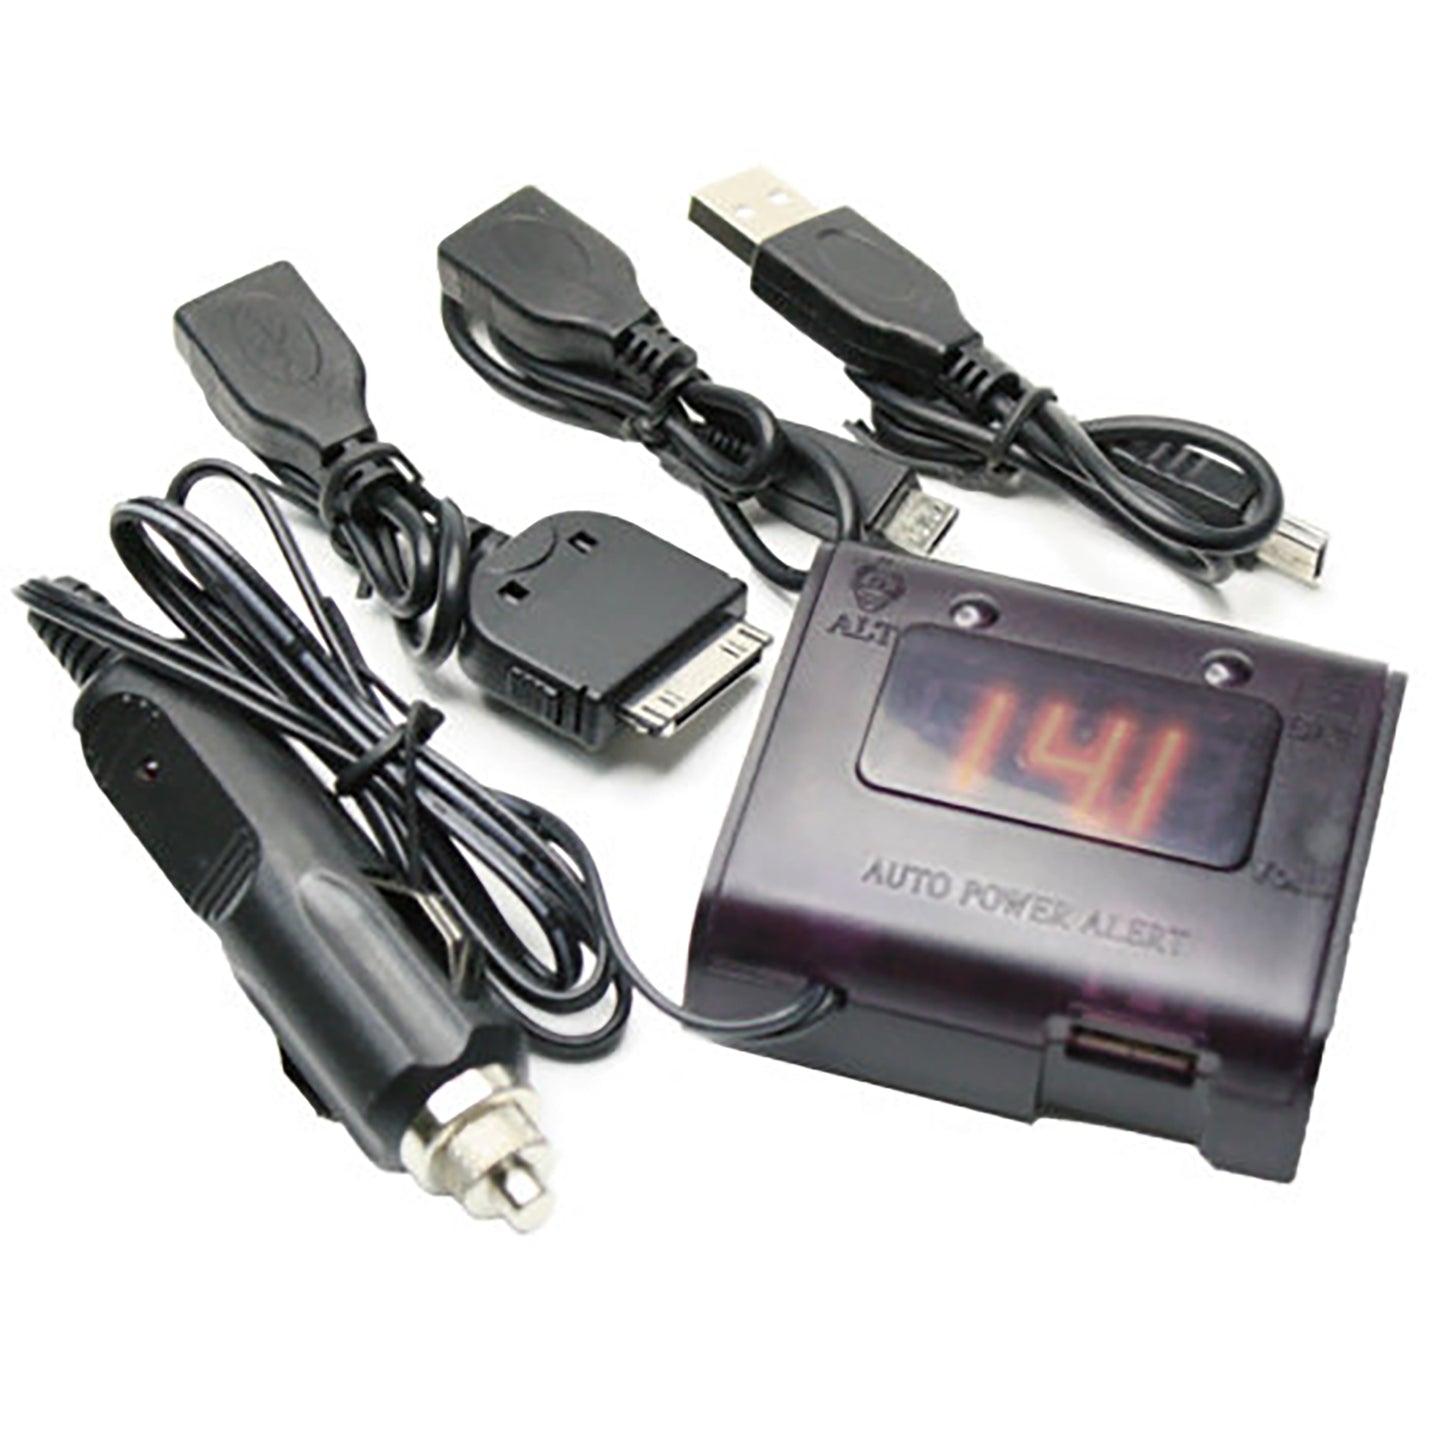 MARINE MASTER AUTO POWER ALERT VOLTMETER & USB CHARGER BATTERY CHARGER